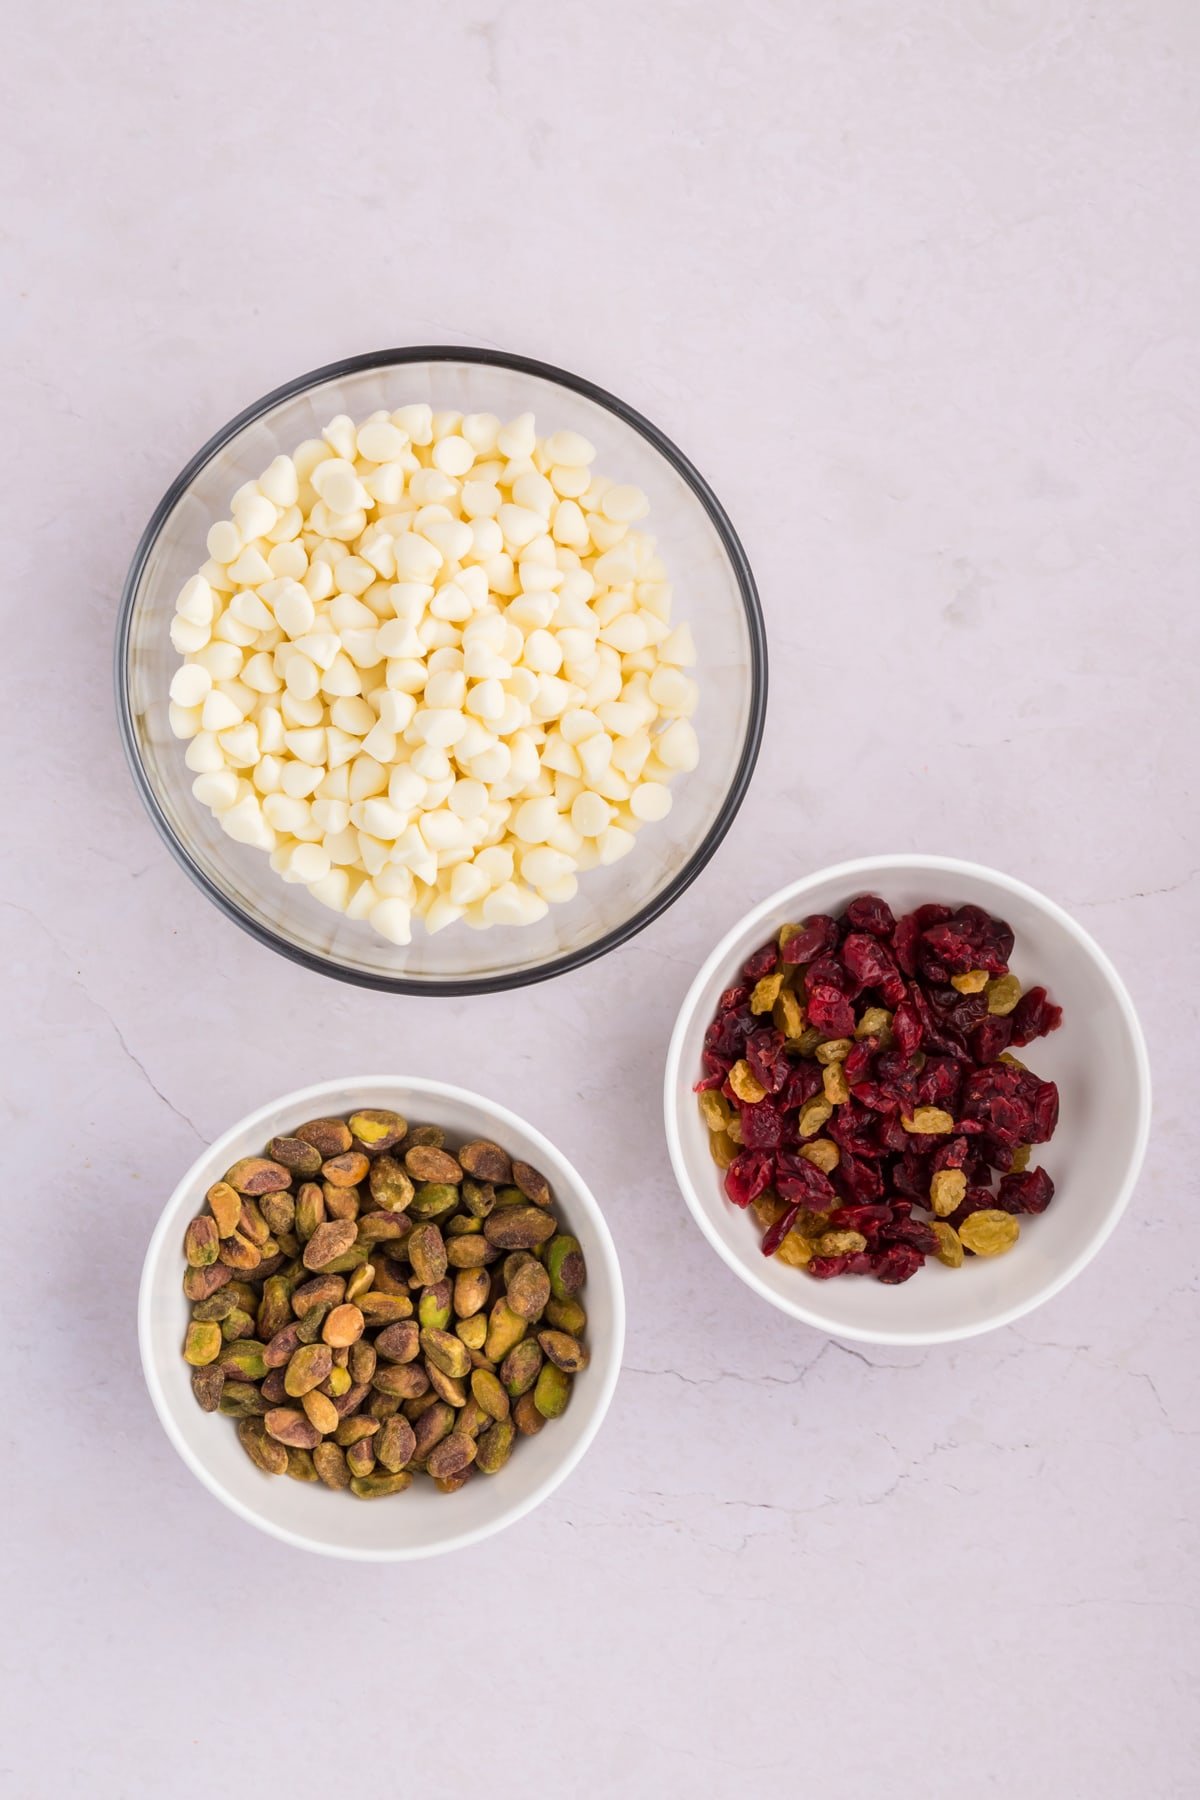 white chocolate chips, pistachios and dried fruit